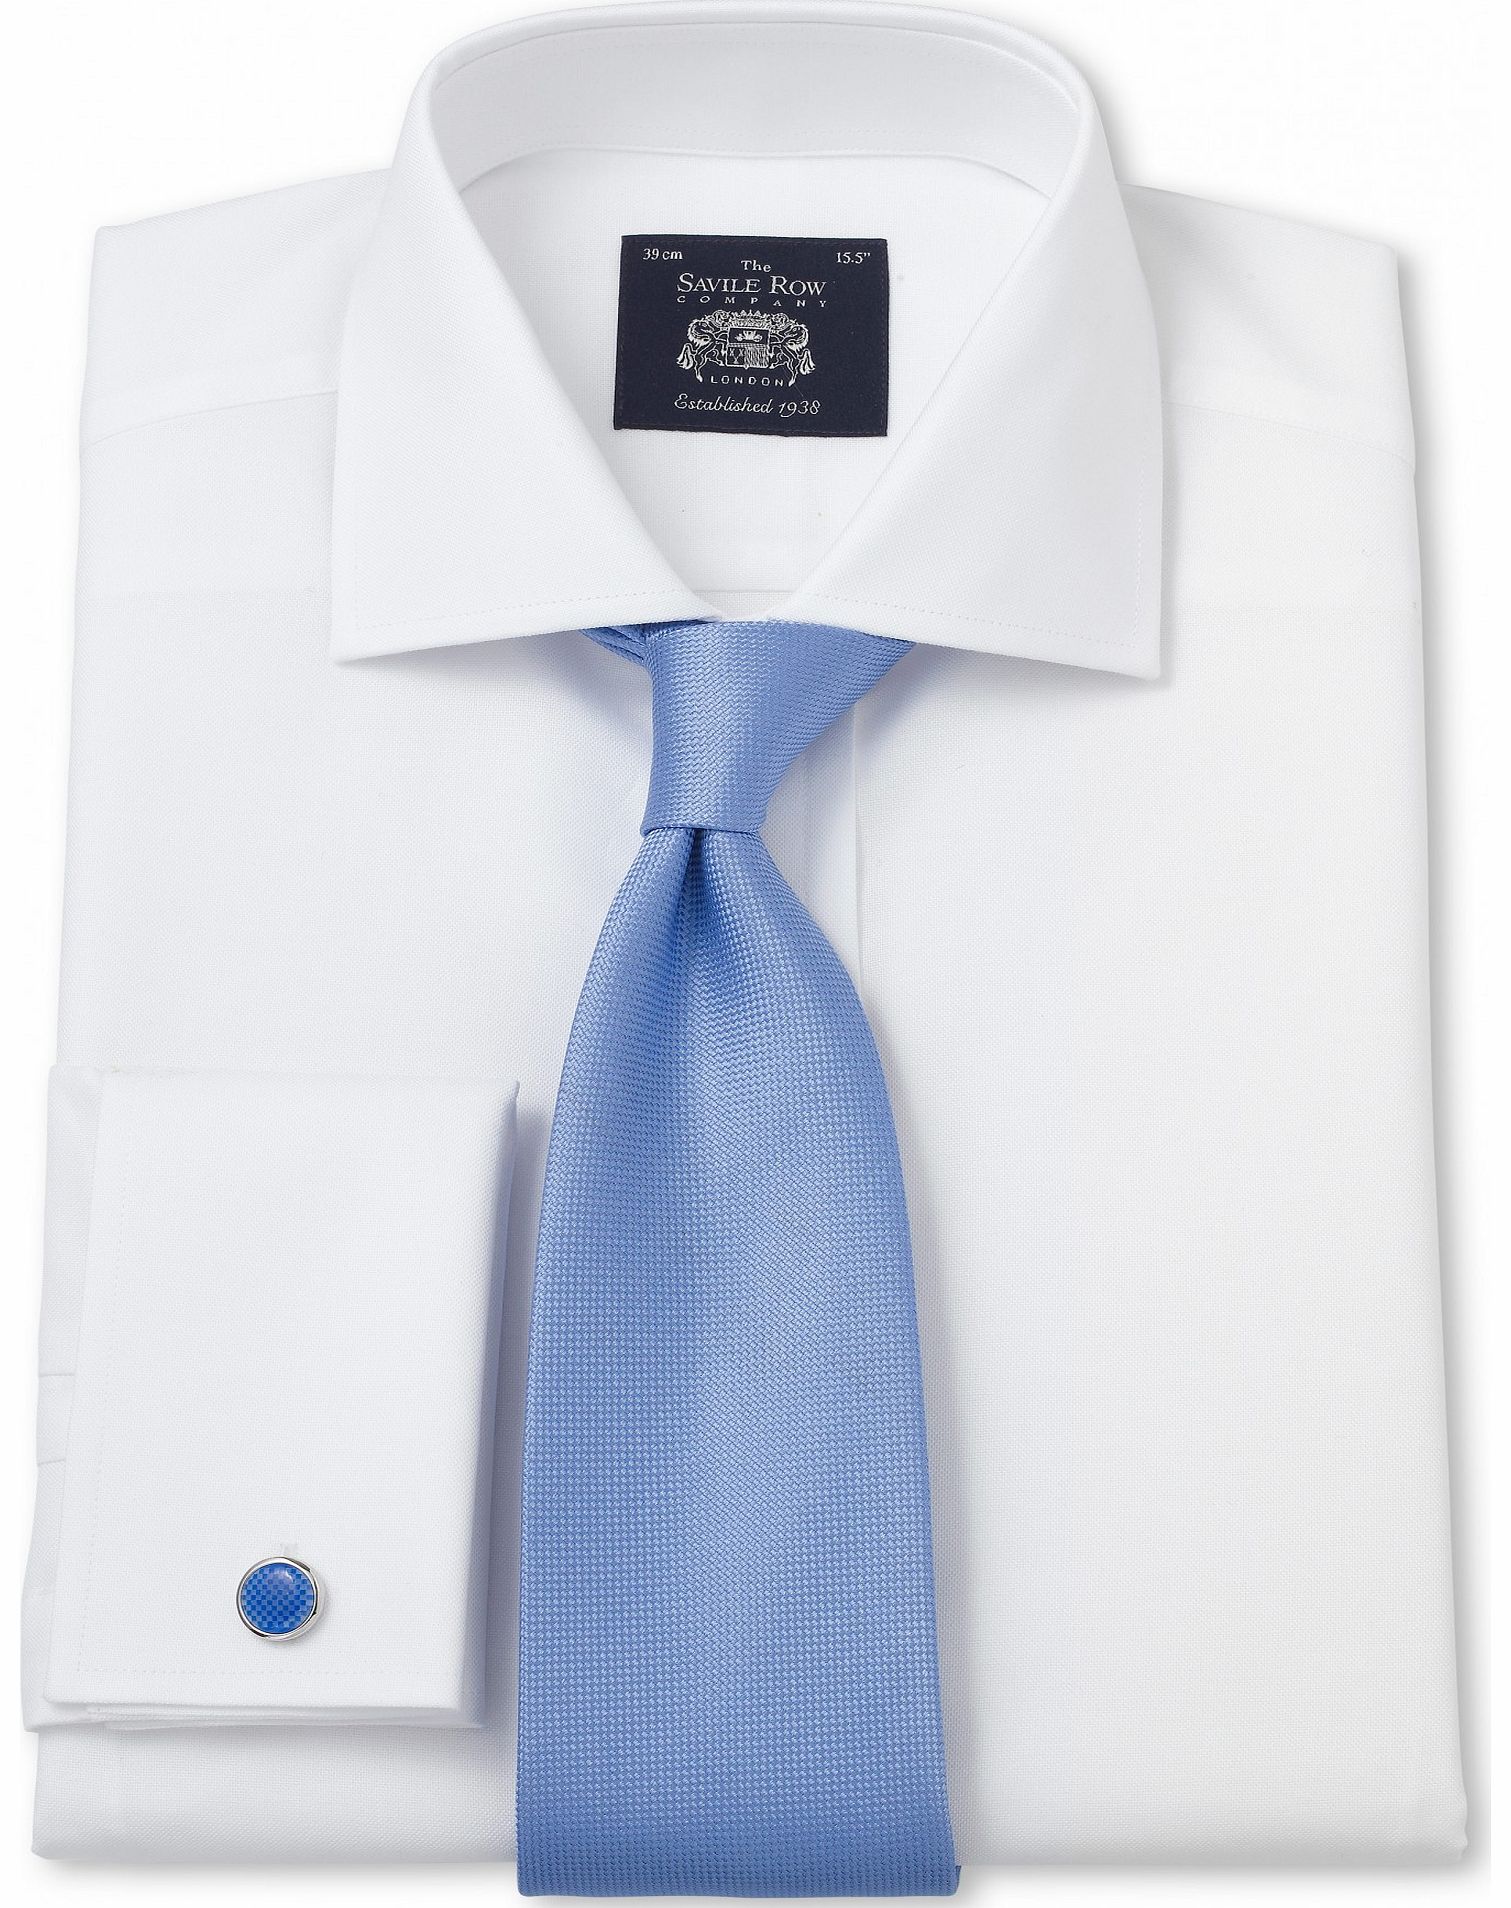 Savile Row Company White Pinpoint Slim Fit Shirt 15`` Lengthened